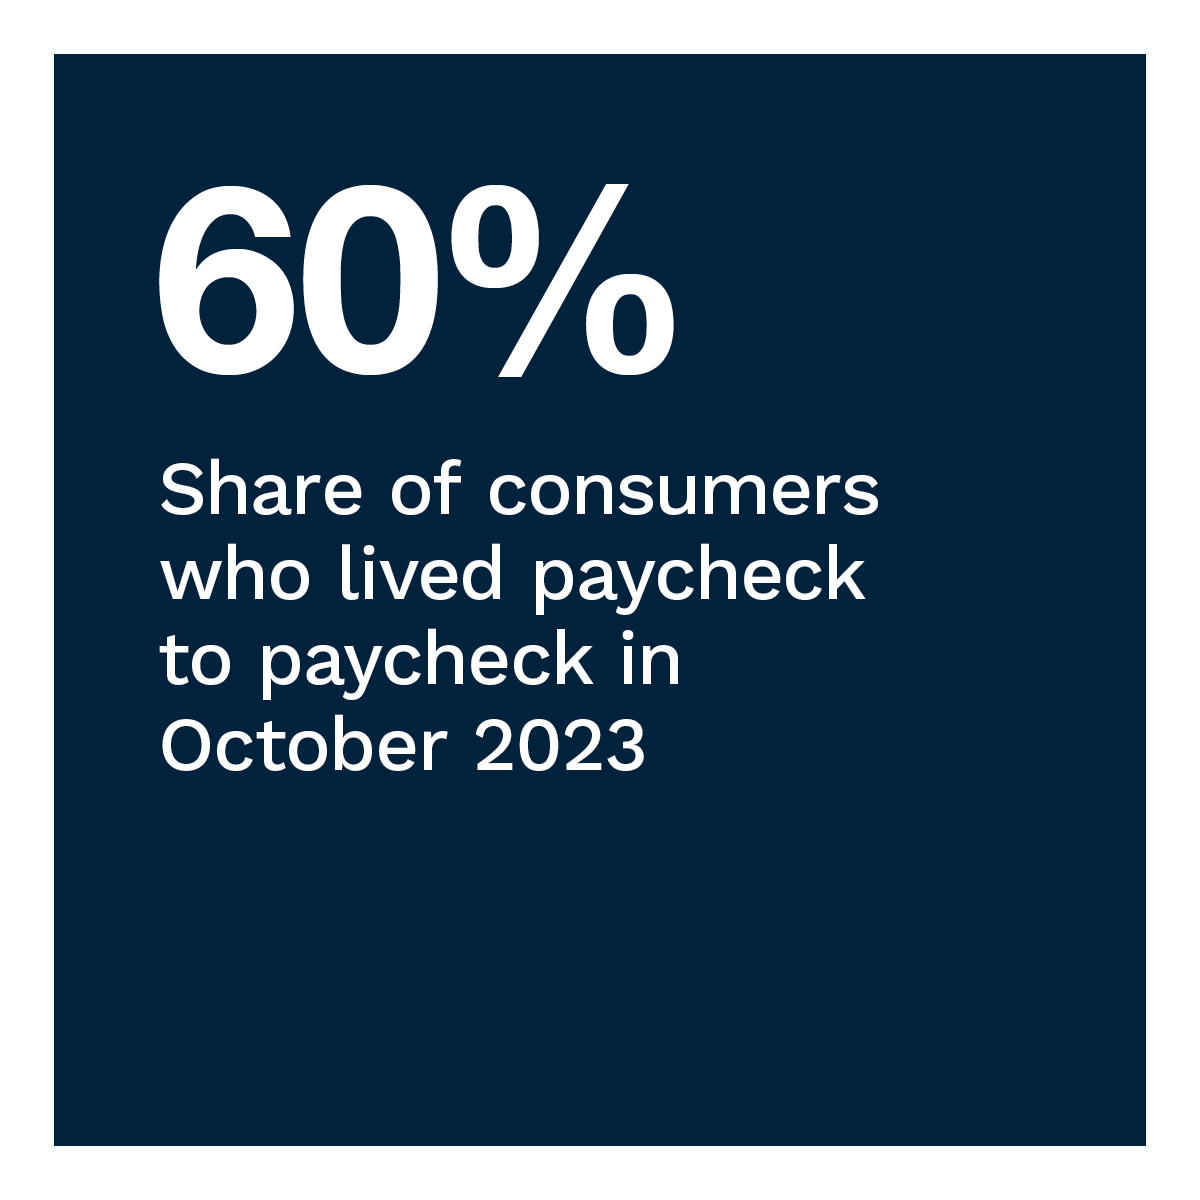 60%: Share of consumers who lived paycheck to paycheck in October 2023